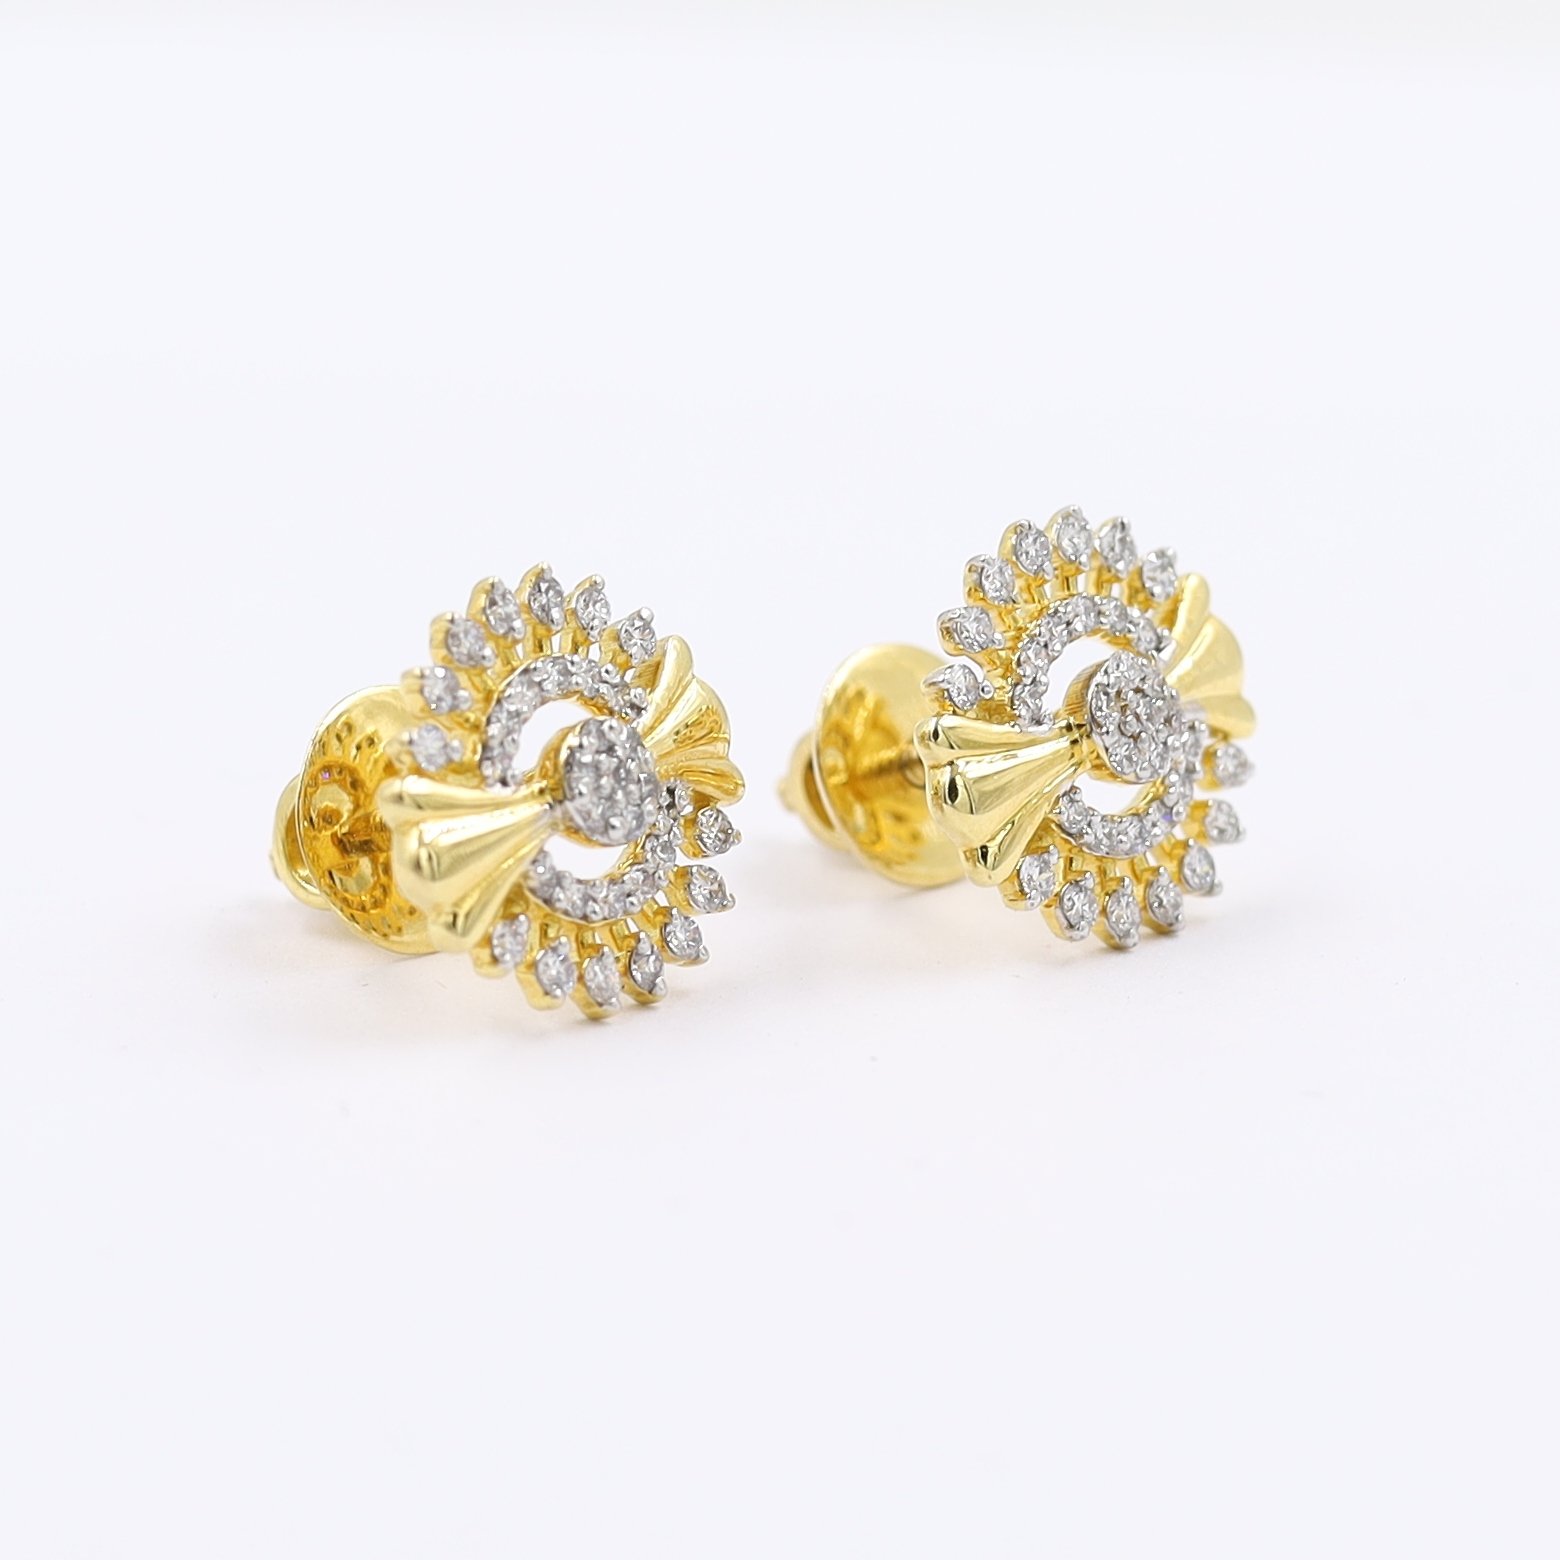 Indian Gold plated Earrings Traditional Women Stud Bollywood Fashion  Jewellery | eBay